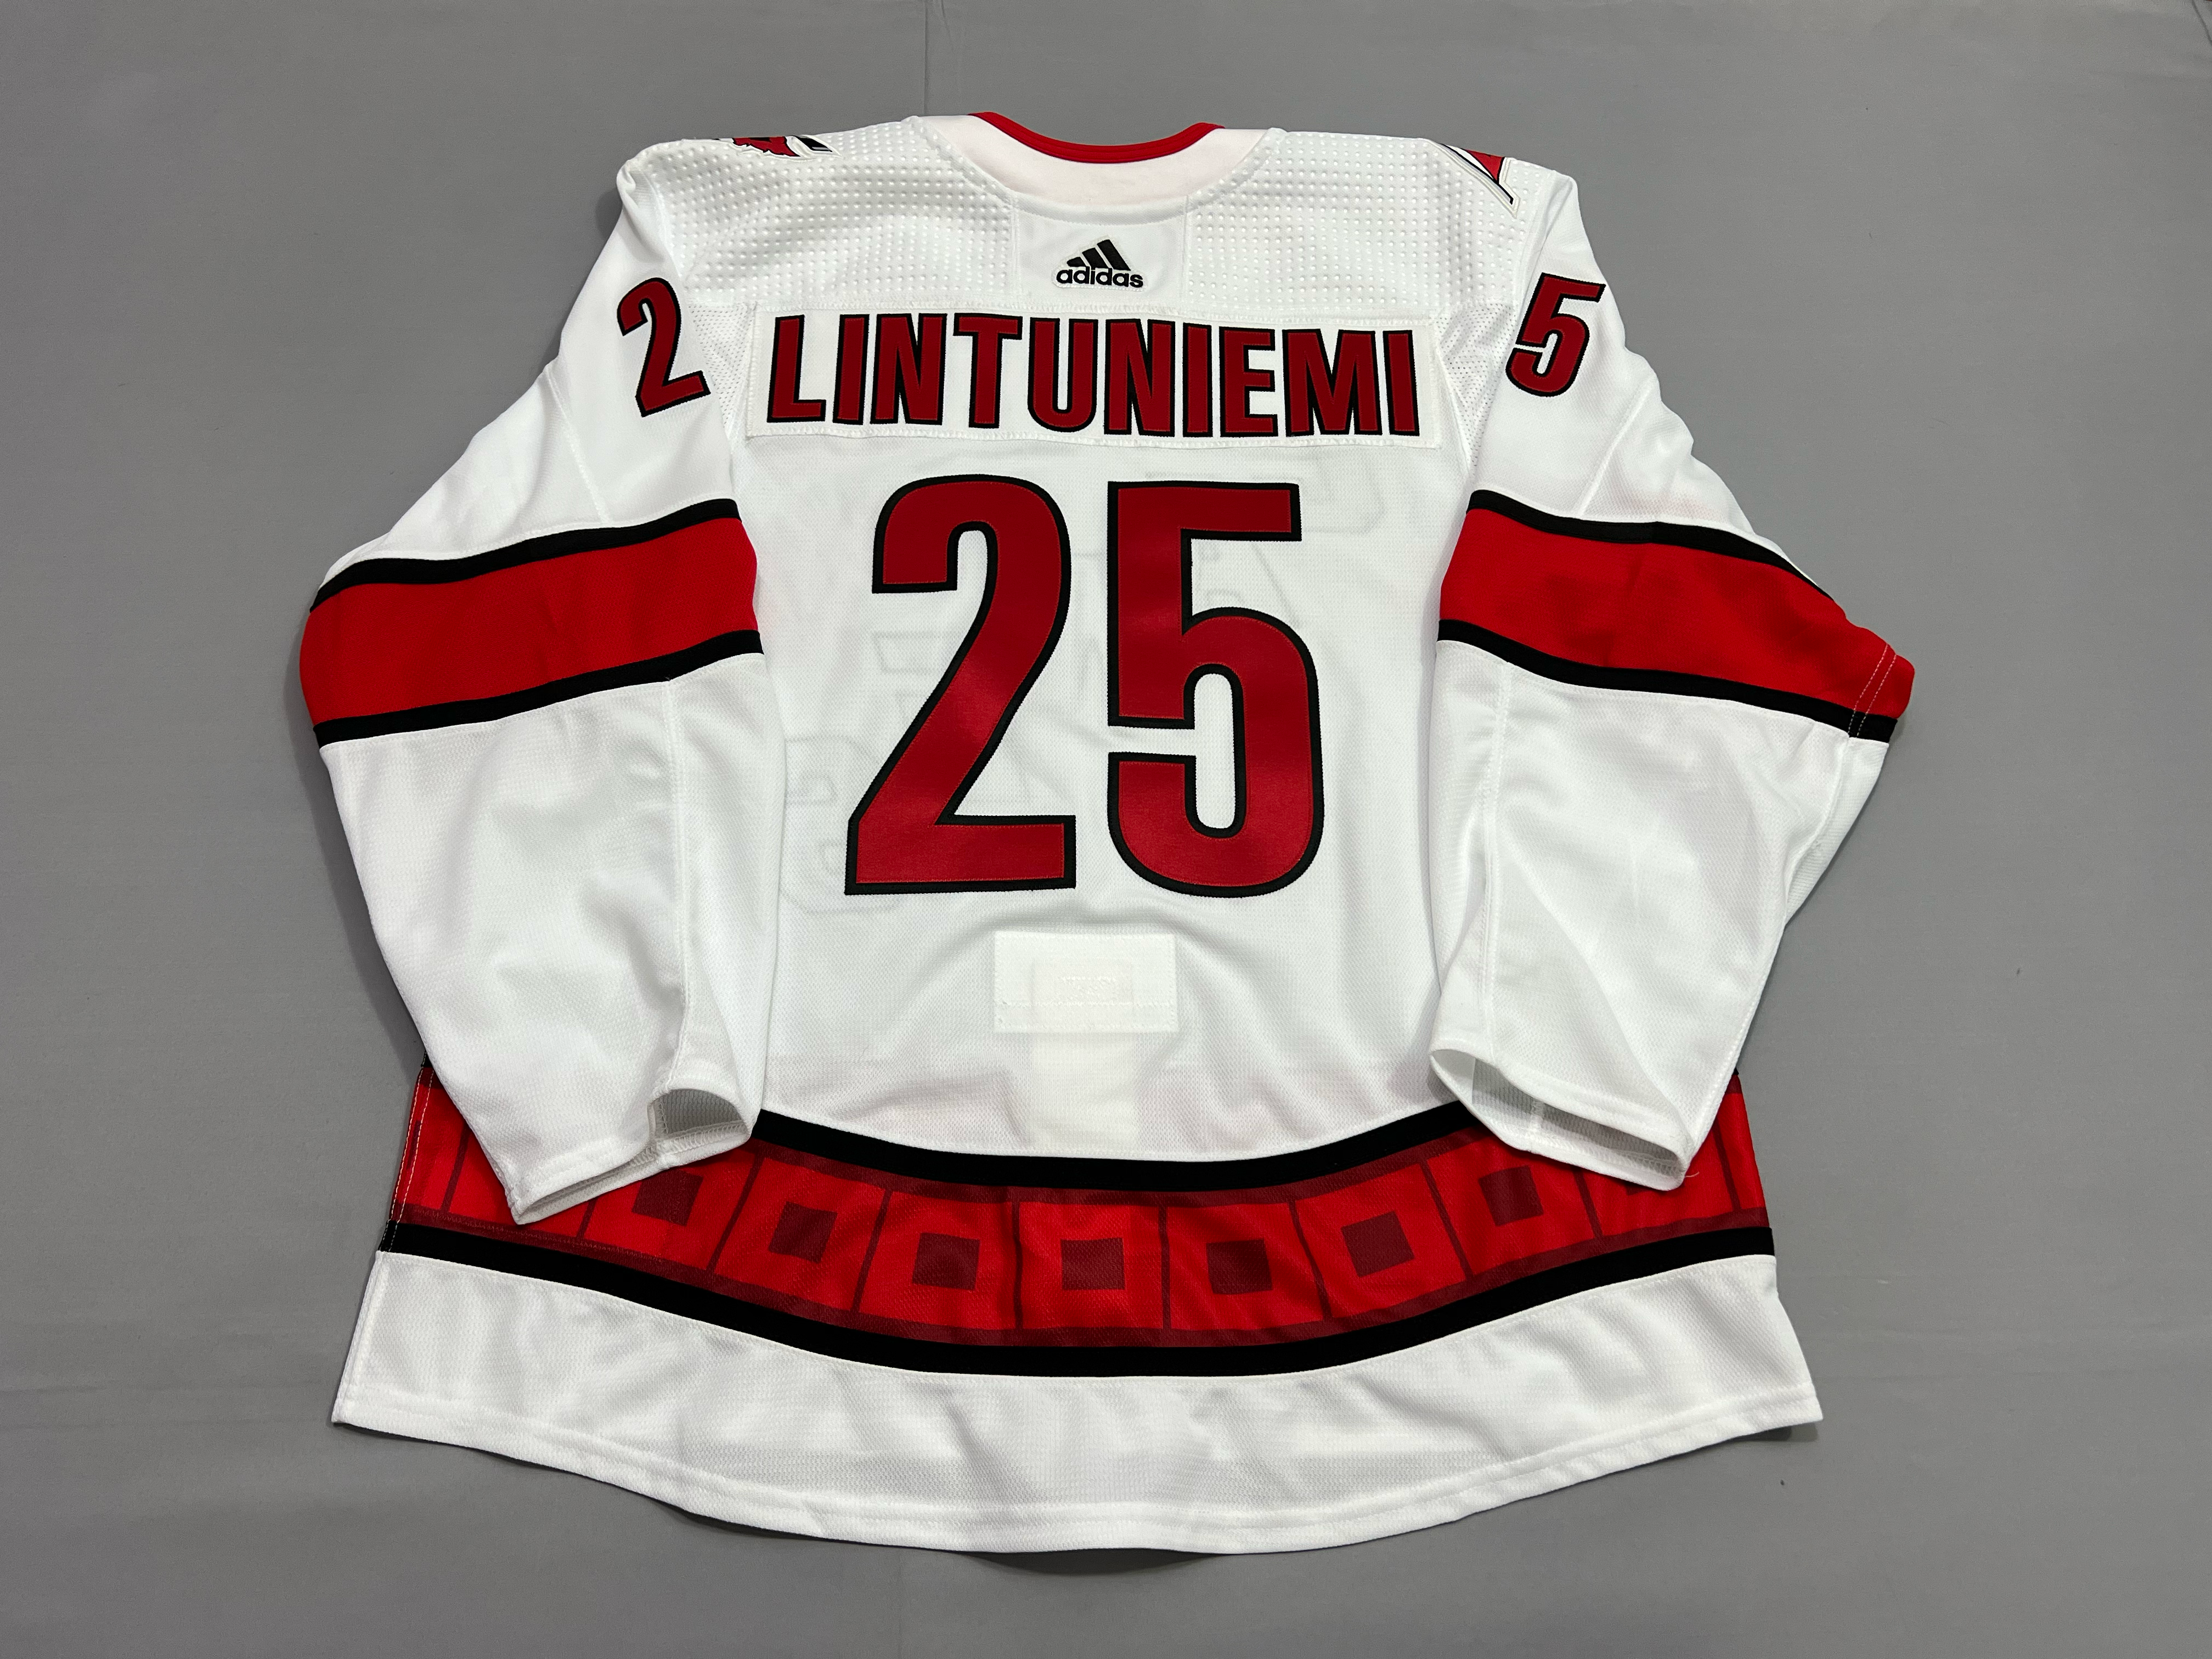 For Sale: Carolina Hurricanes Team Issued '07-'08 Reebok Edge jersey size  58 blank w/Tenth Anniversary patch. Asking $115 but I'm definitely open to  offers! : r/hockeyjerseys